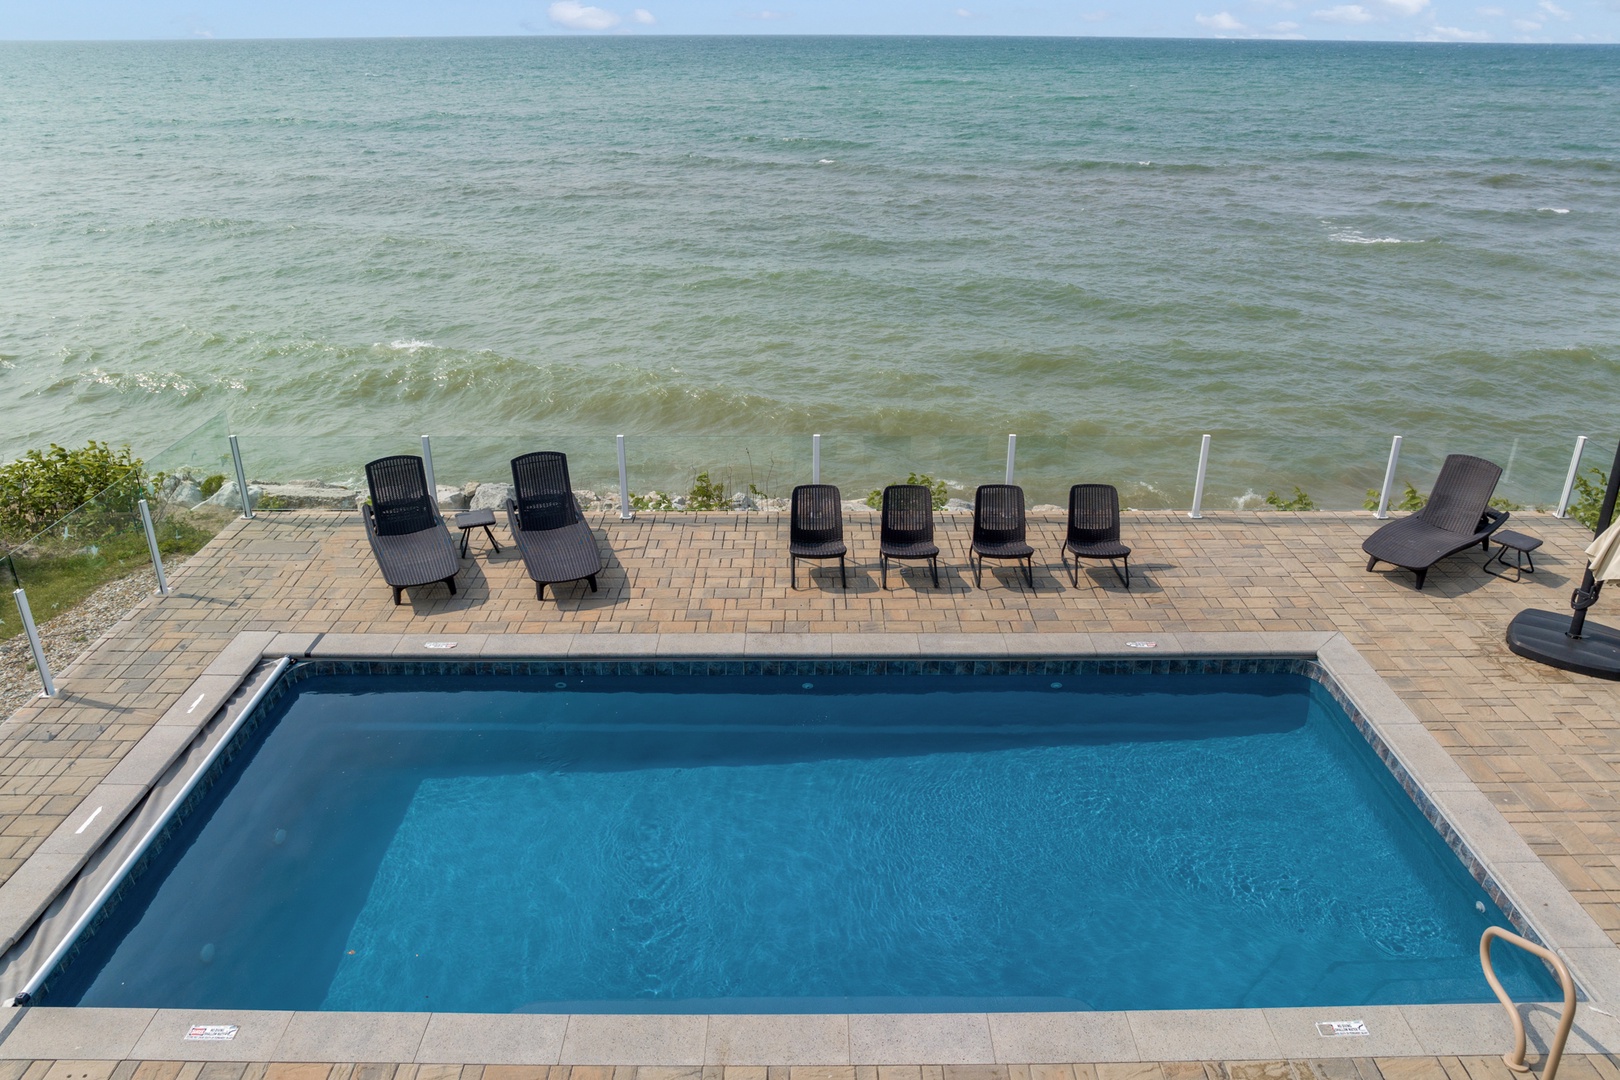 Step out onto your private balcony and soak in the stunning Lake Michigan views.